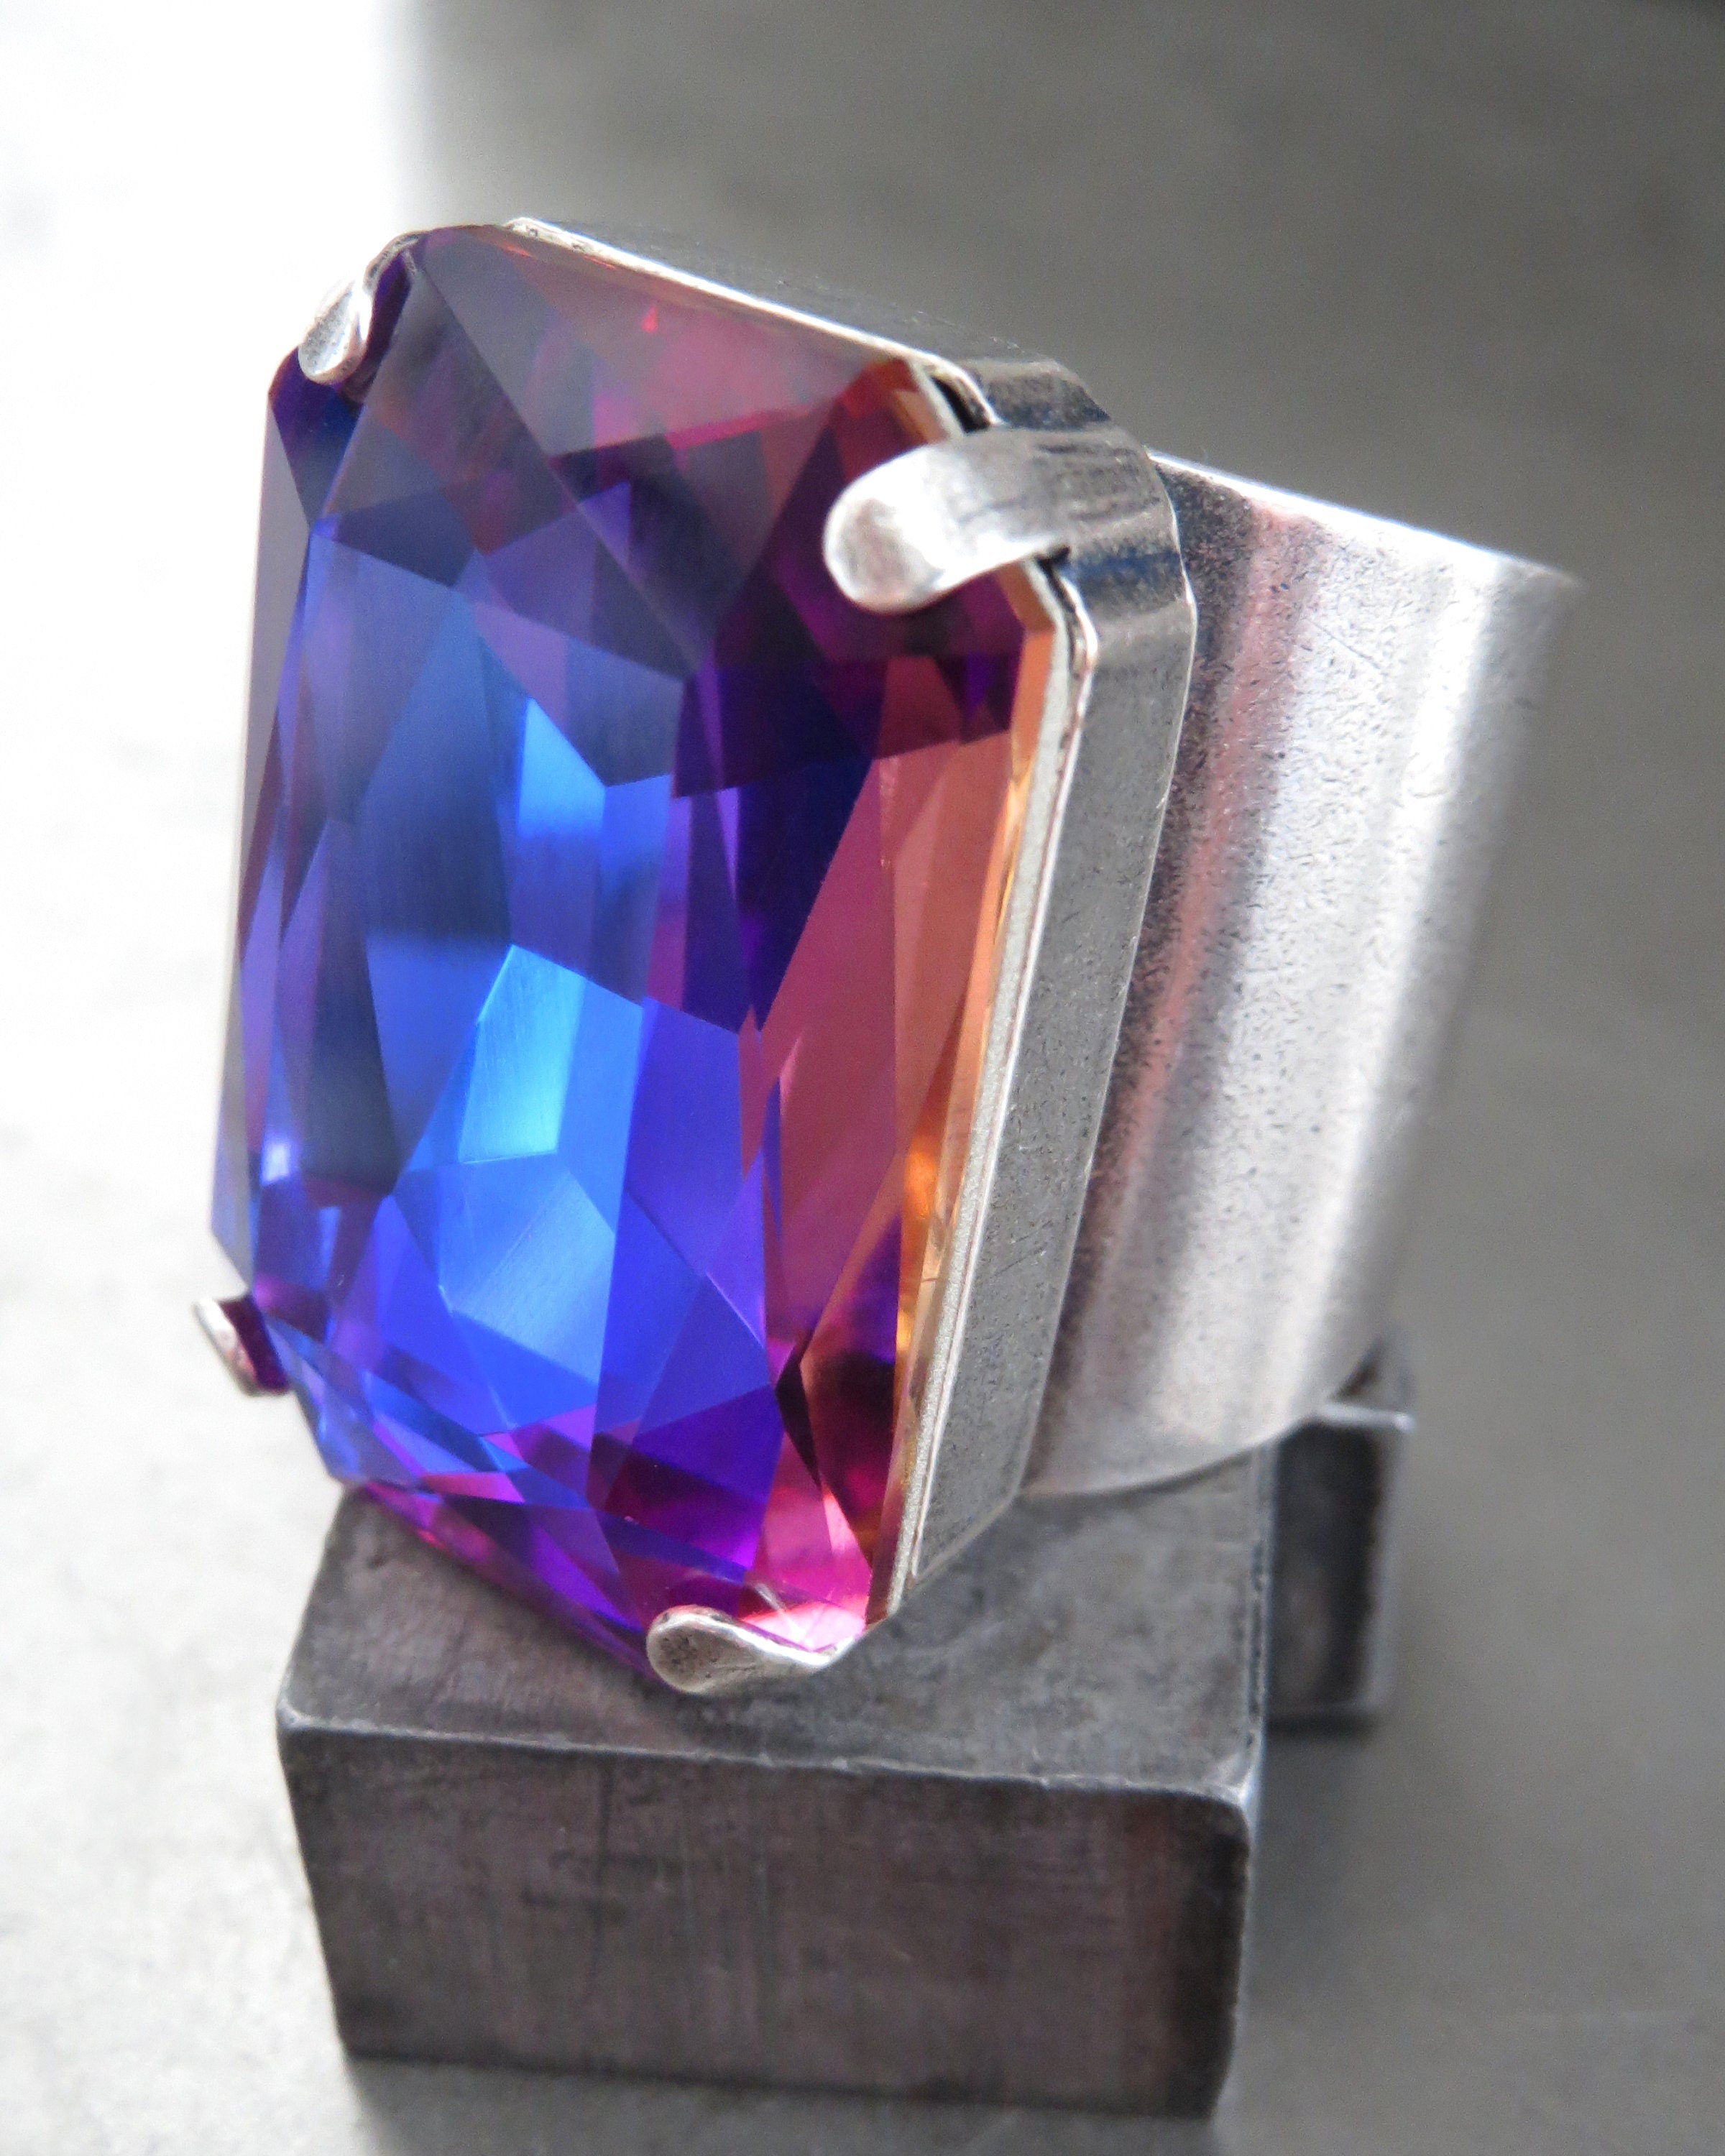 NEBULA - Deep Blue Crystal Ring with Magenta, Purple, Violet Flashes - Antiqued Silver or Brass Adjustable Ring Band, Unisex Ring Style